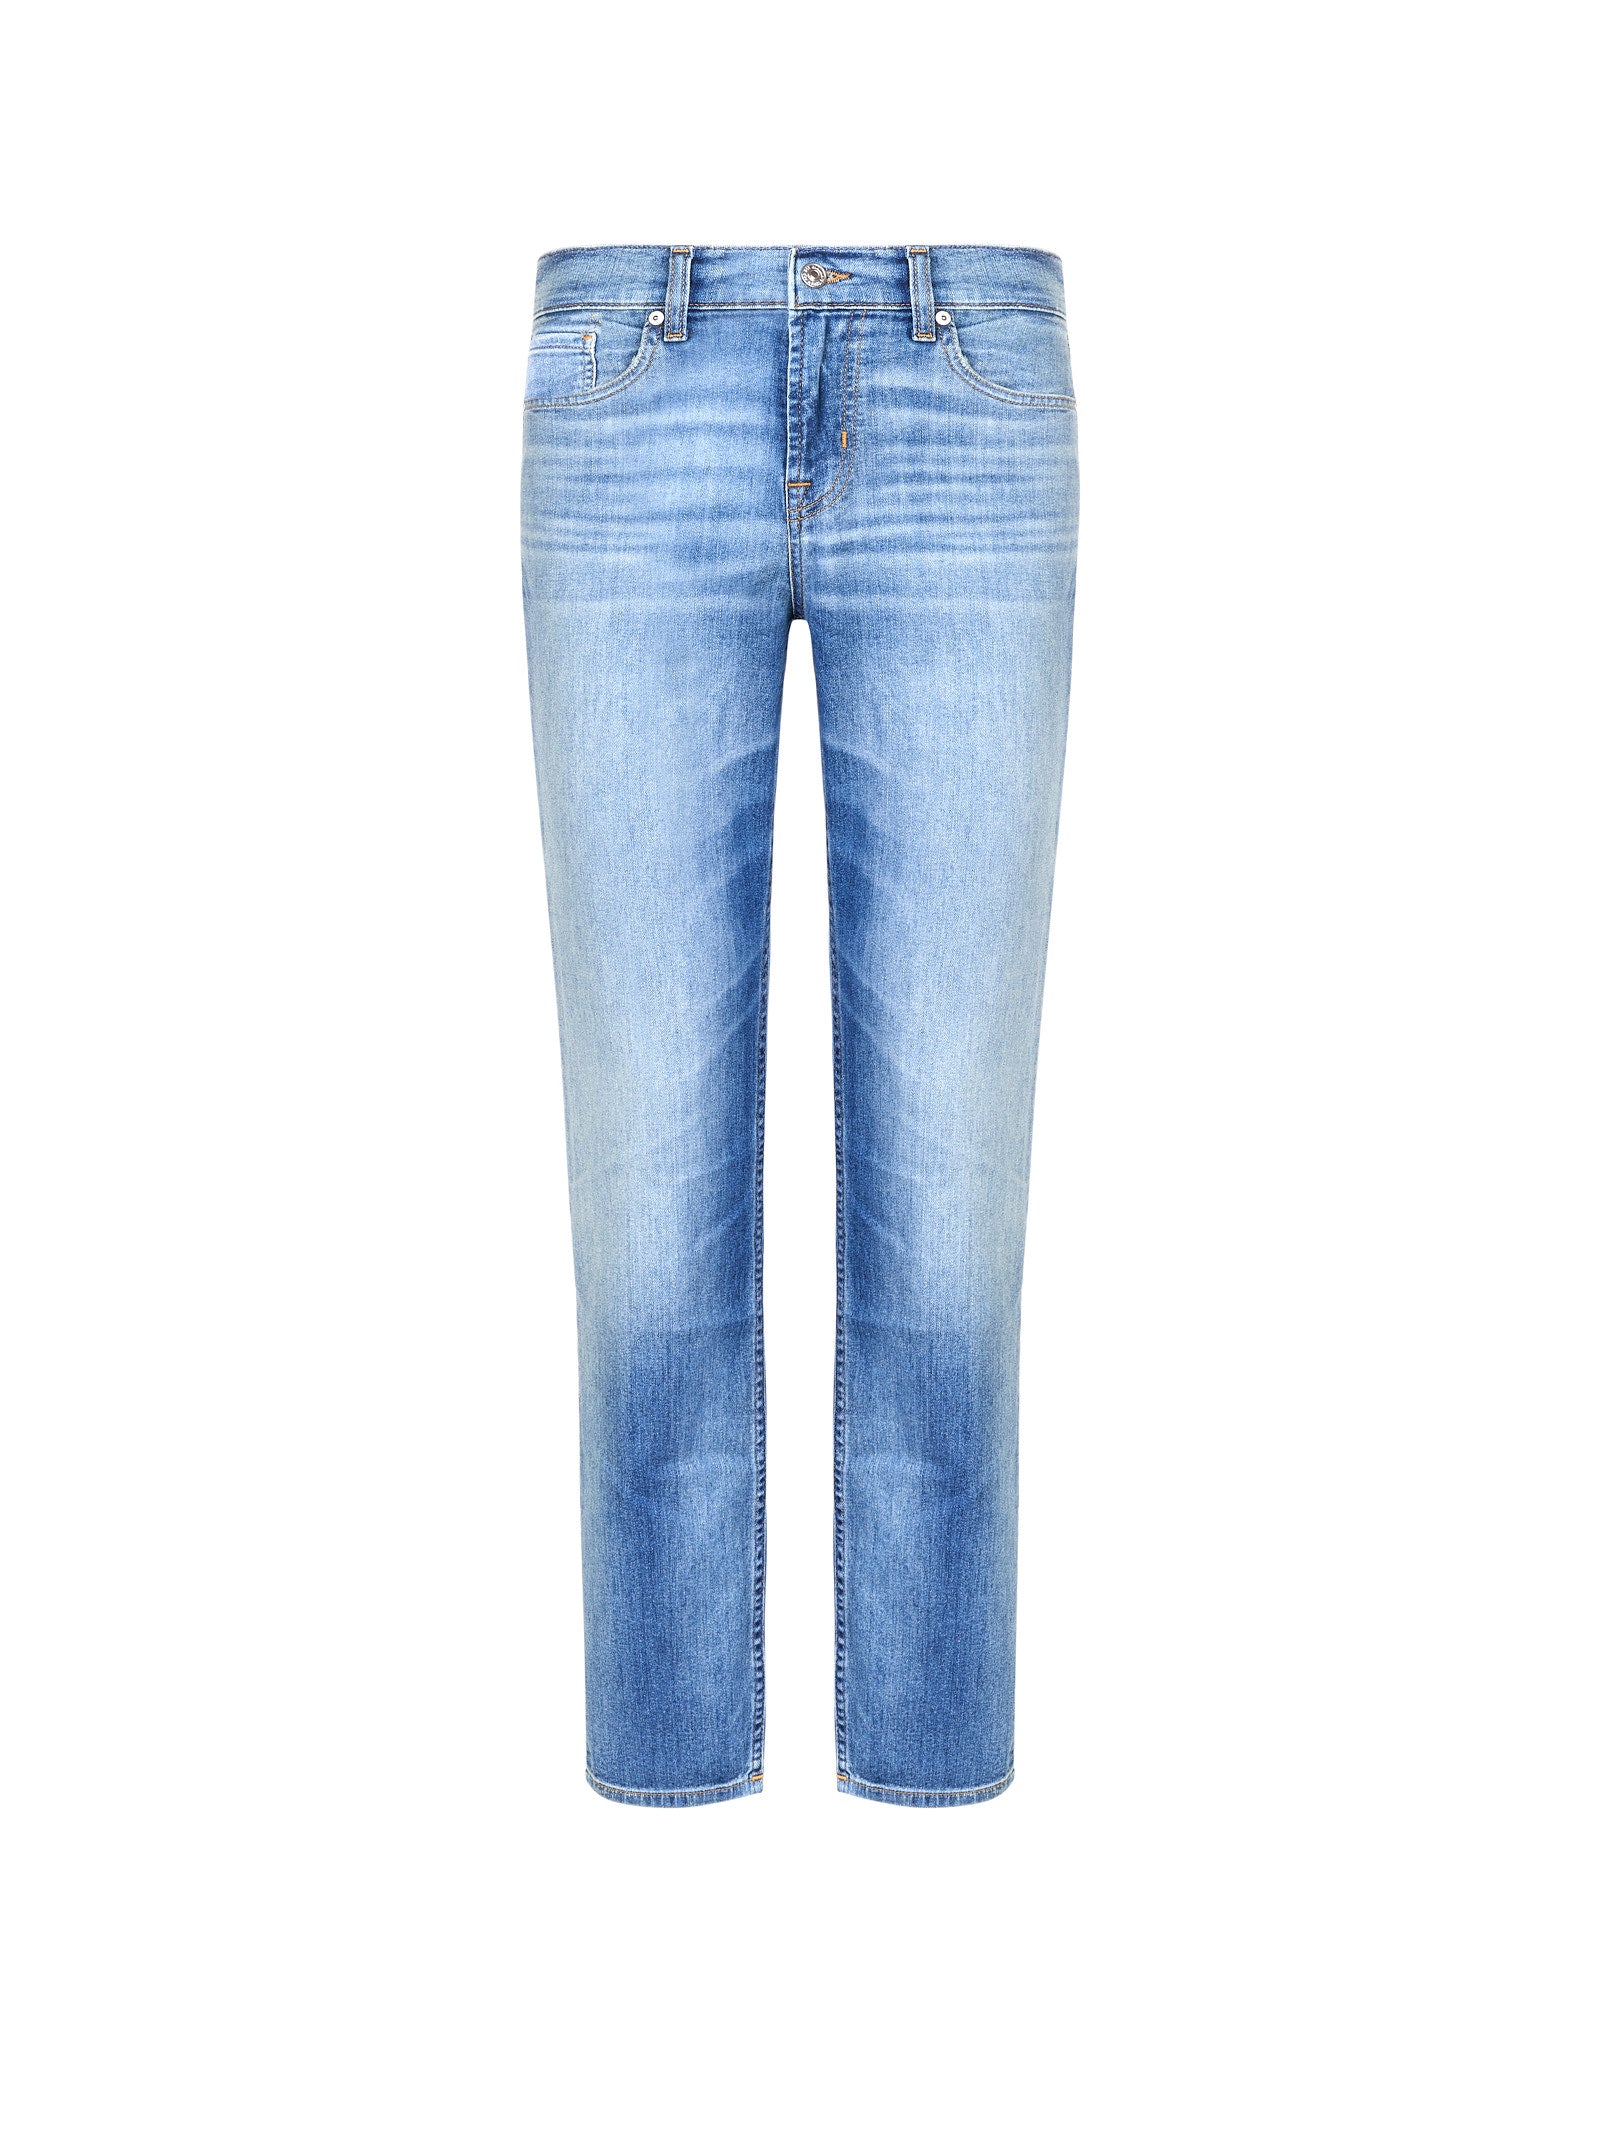 Jeans 7 FOR ALL MANKIND
Blu